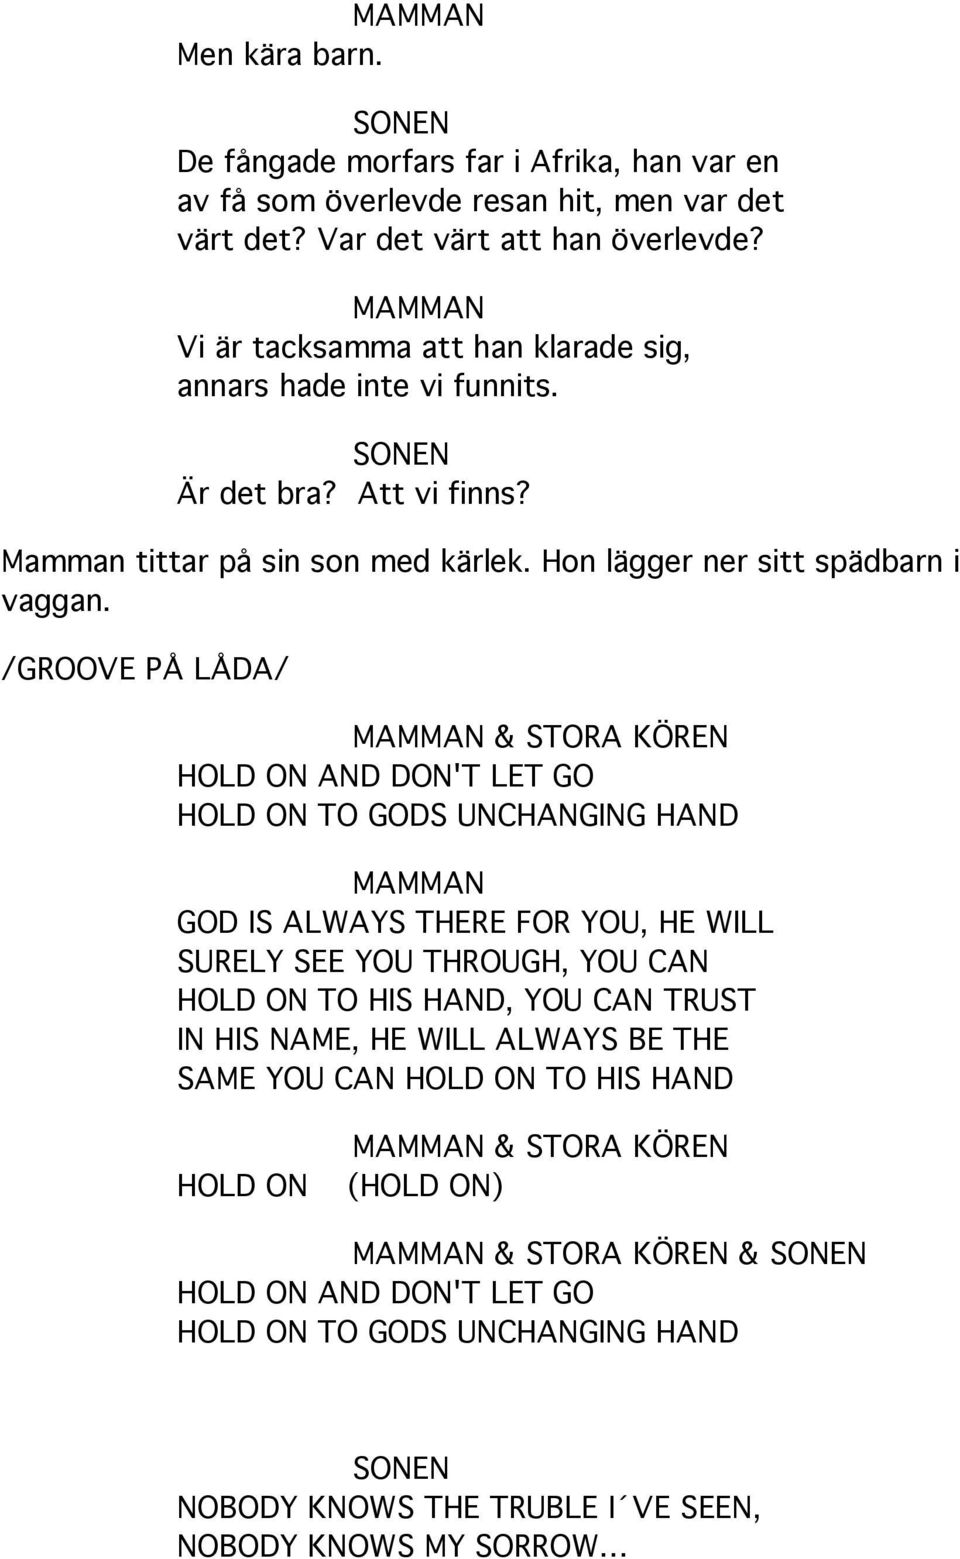 /GROOVE PÅ LÅDA/ MAMMAN & STORA KÖREN HOLD ON AND DON'T LET GO HOLD ON TO GODS UNCHANGING HAND MAMMAN GOD IS ALWAYS THERE FOR YOU, HE WILL SURELY SEE YOU THROUGH, YOU CAN HOLD ON TO HIS HAND, YOU CAN